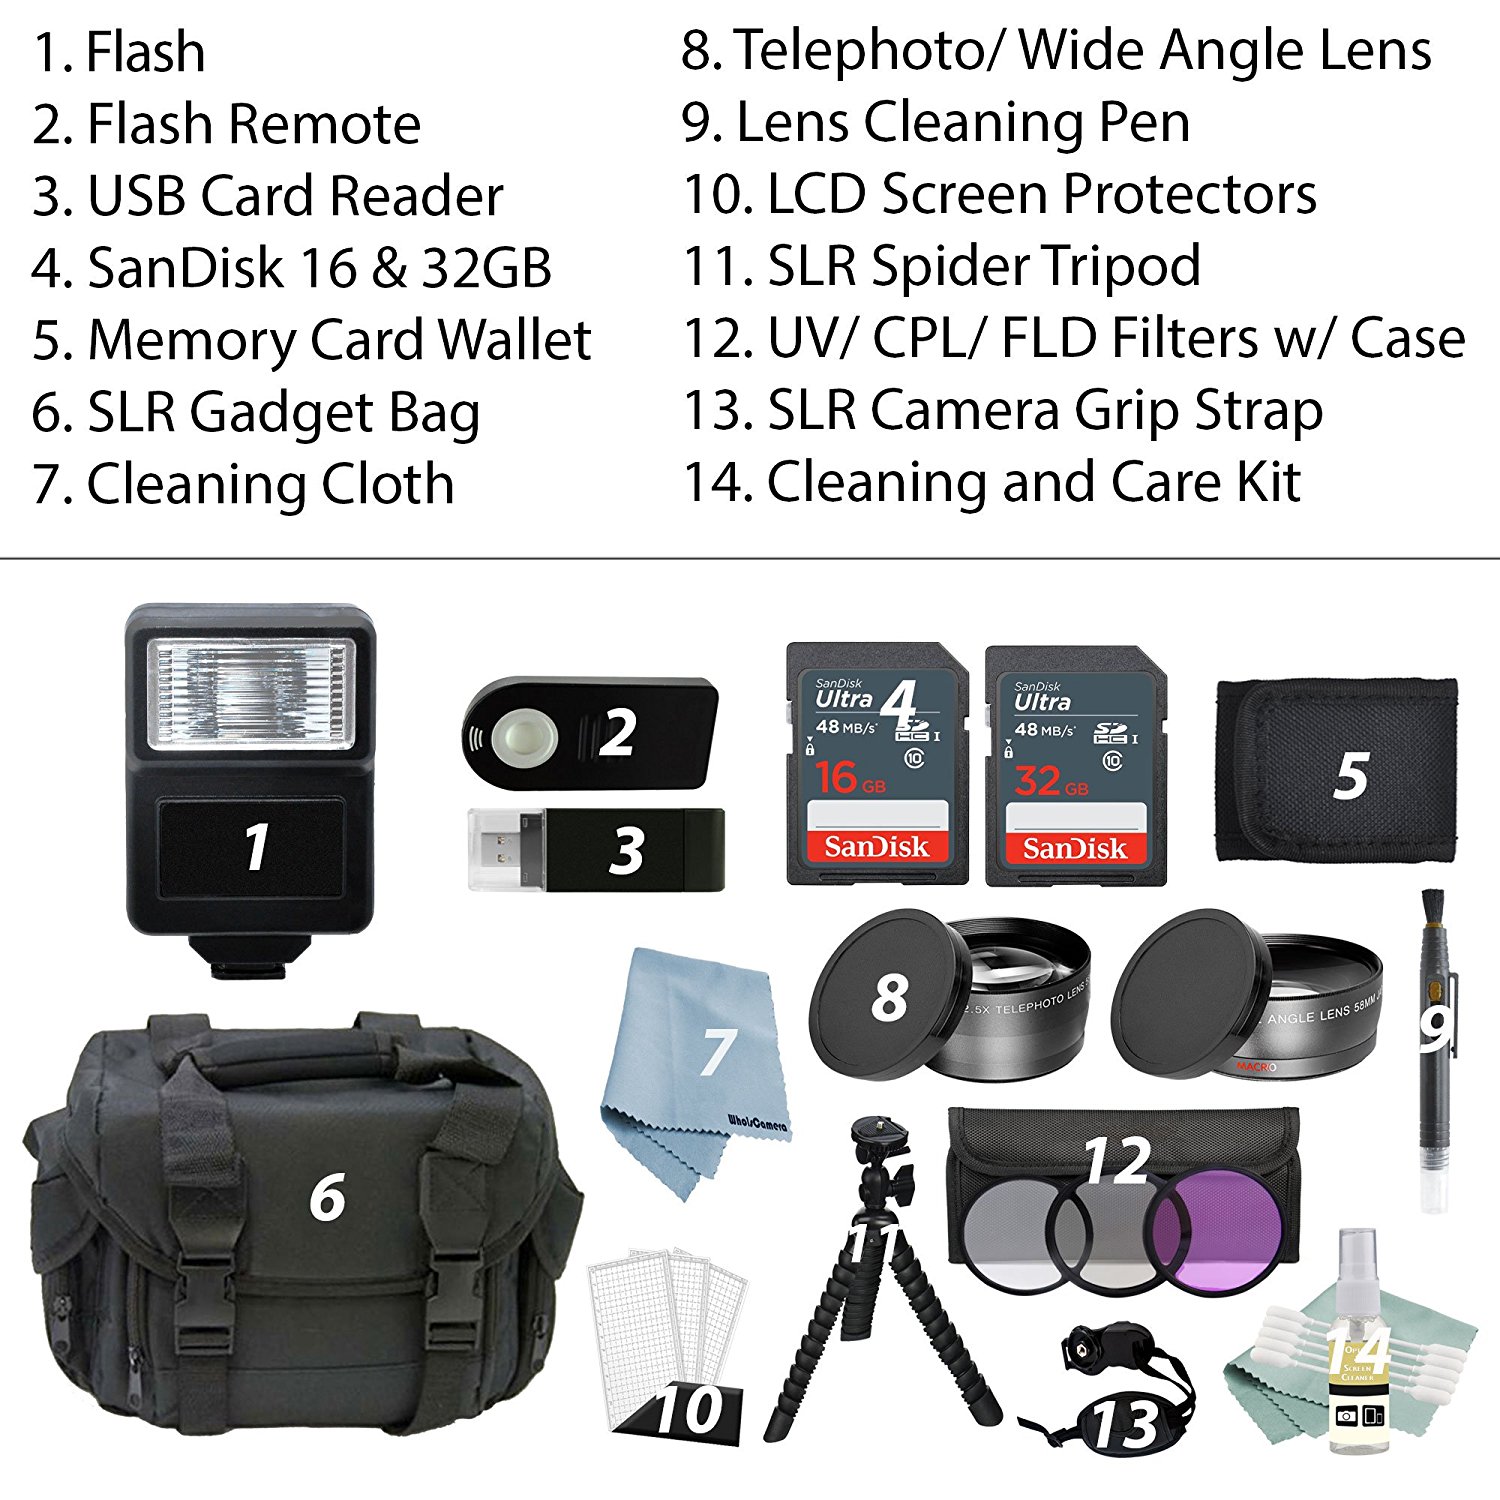 Canon EOS Rebel T6 Bundle With EF-S 18-55mm f/3.5-5.6 IS II Lens + Advanced Accessory Bundle - image 3 of 7